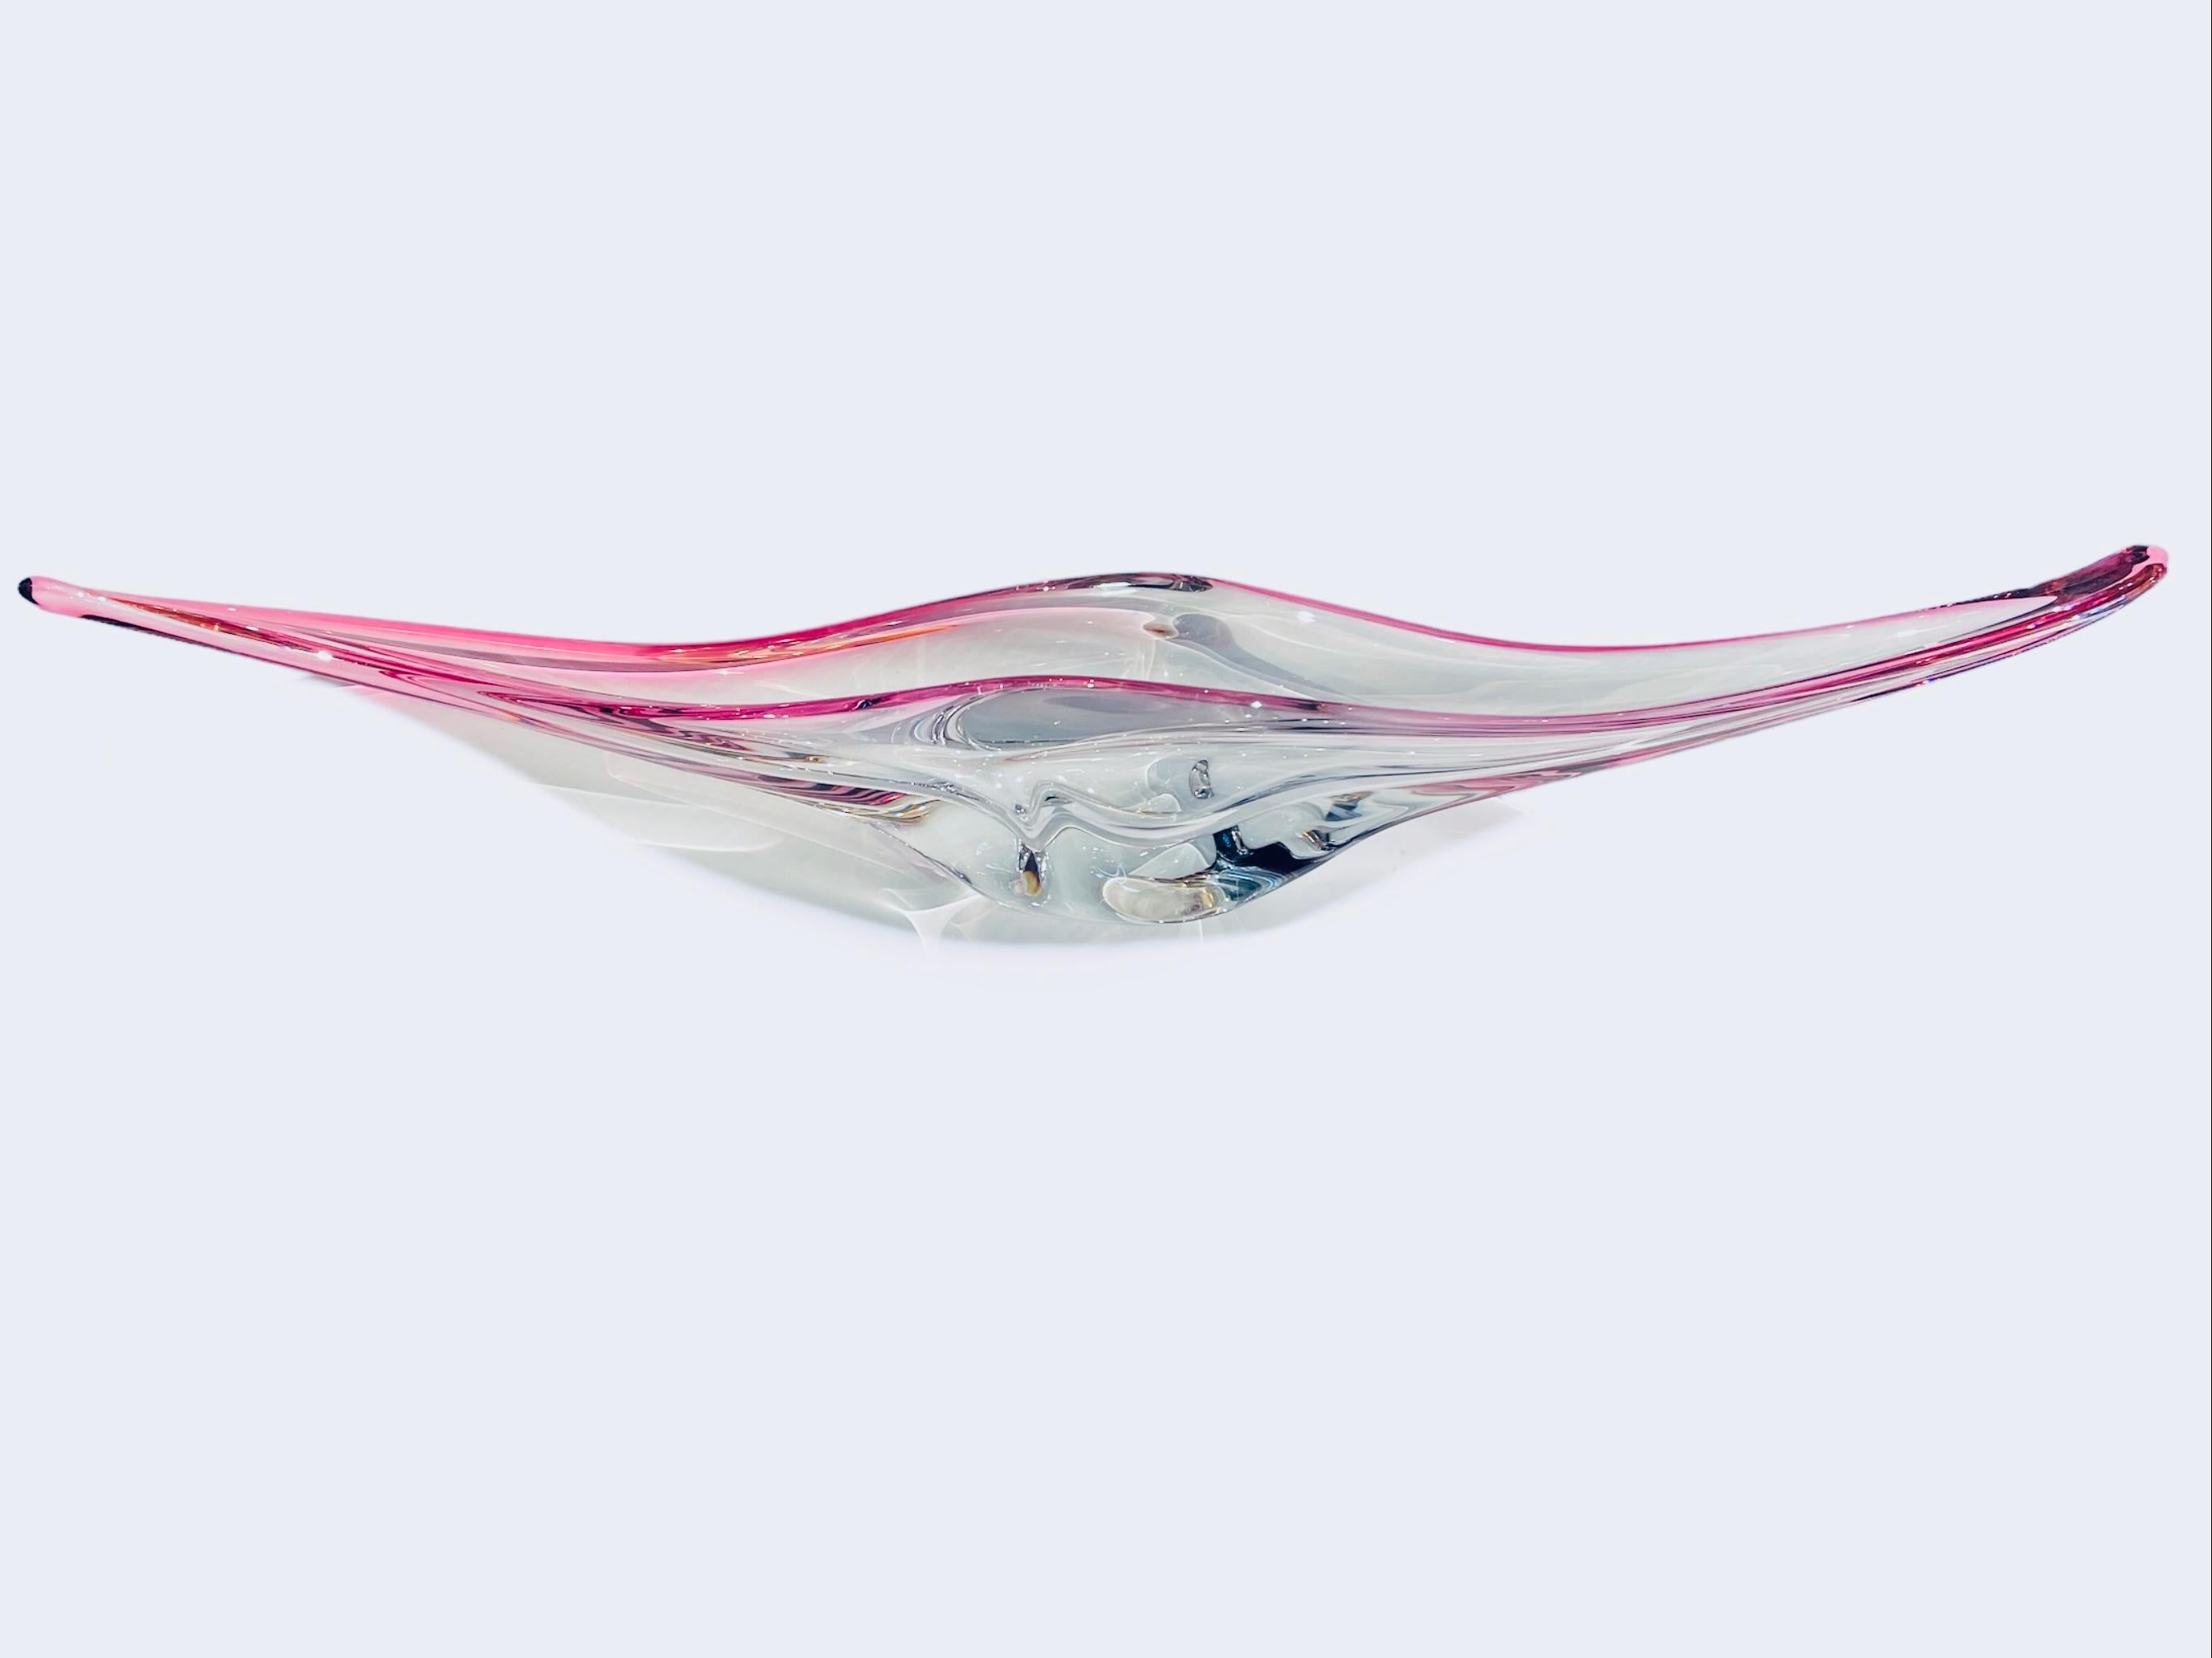 This is a mid century French Art Crystal Centerpiece. It depicts an elongated mantraya like shaped clear crystal vase/bowl with dark pink borders.